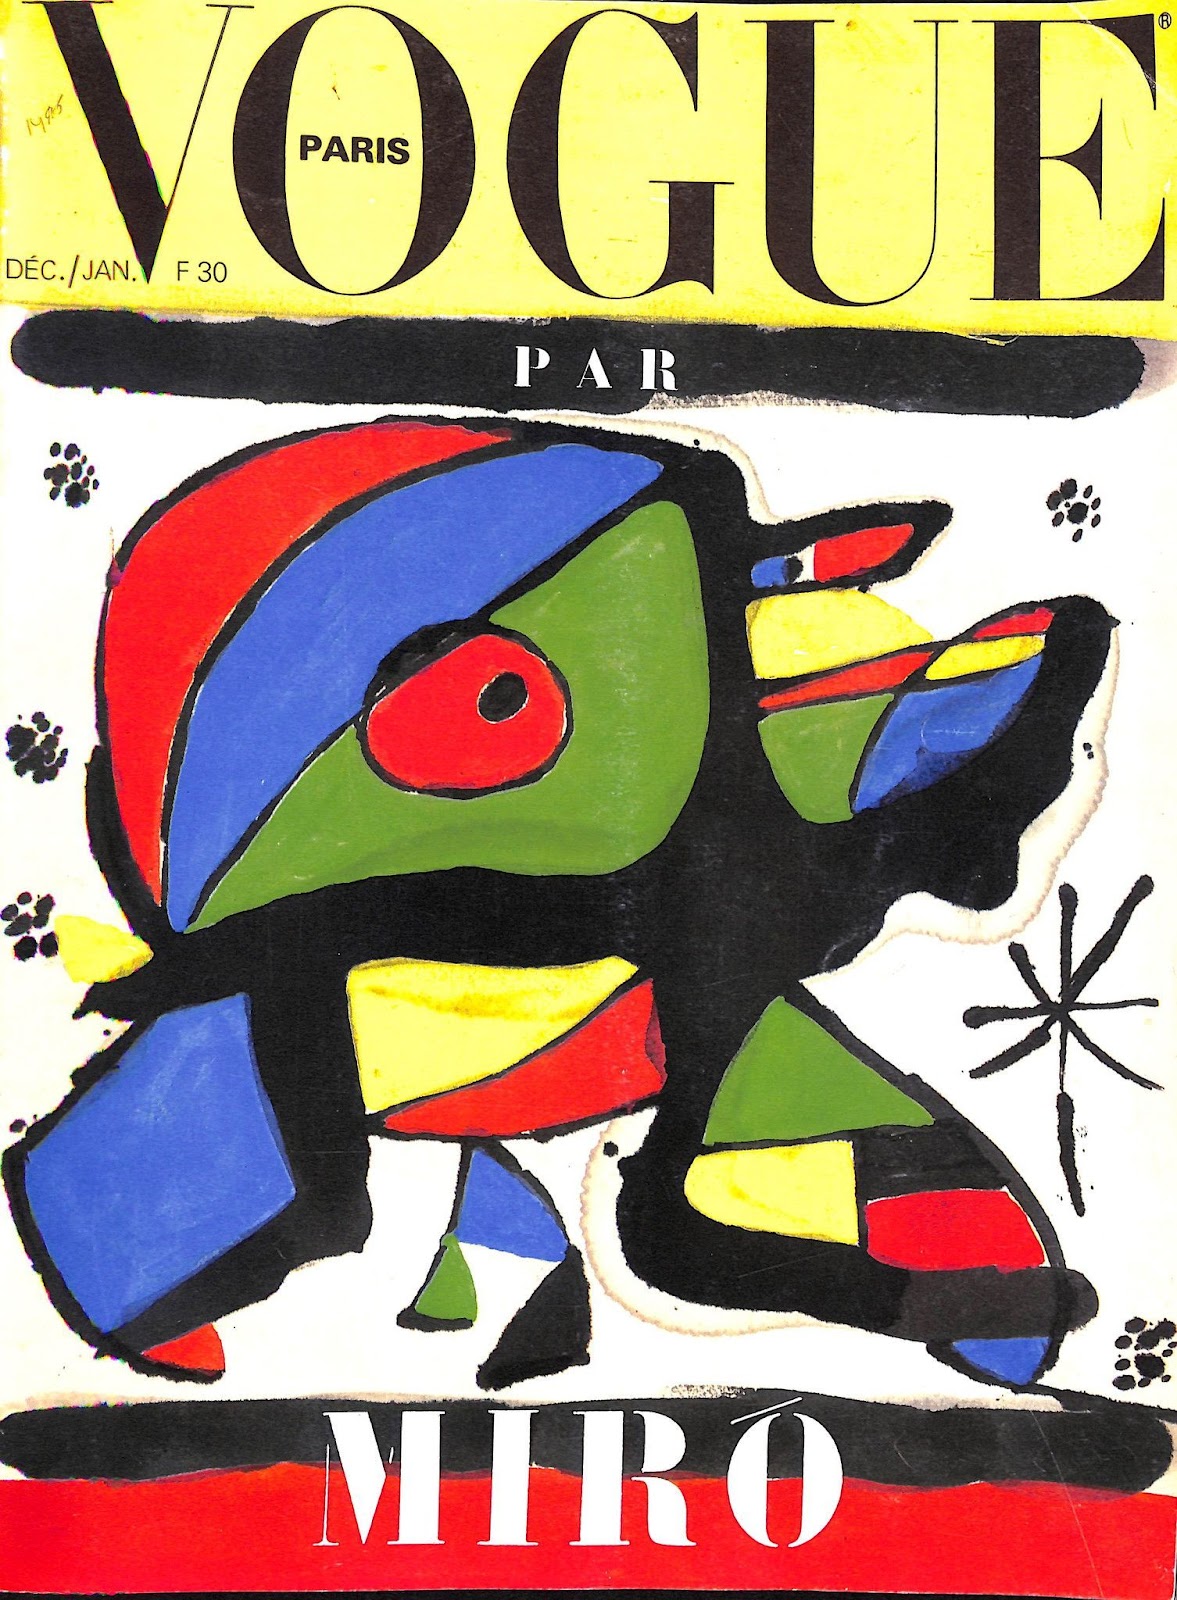 Joan Miró, Vogue cover, December 1979 issue.